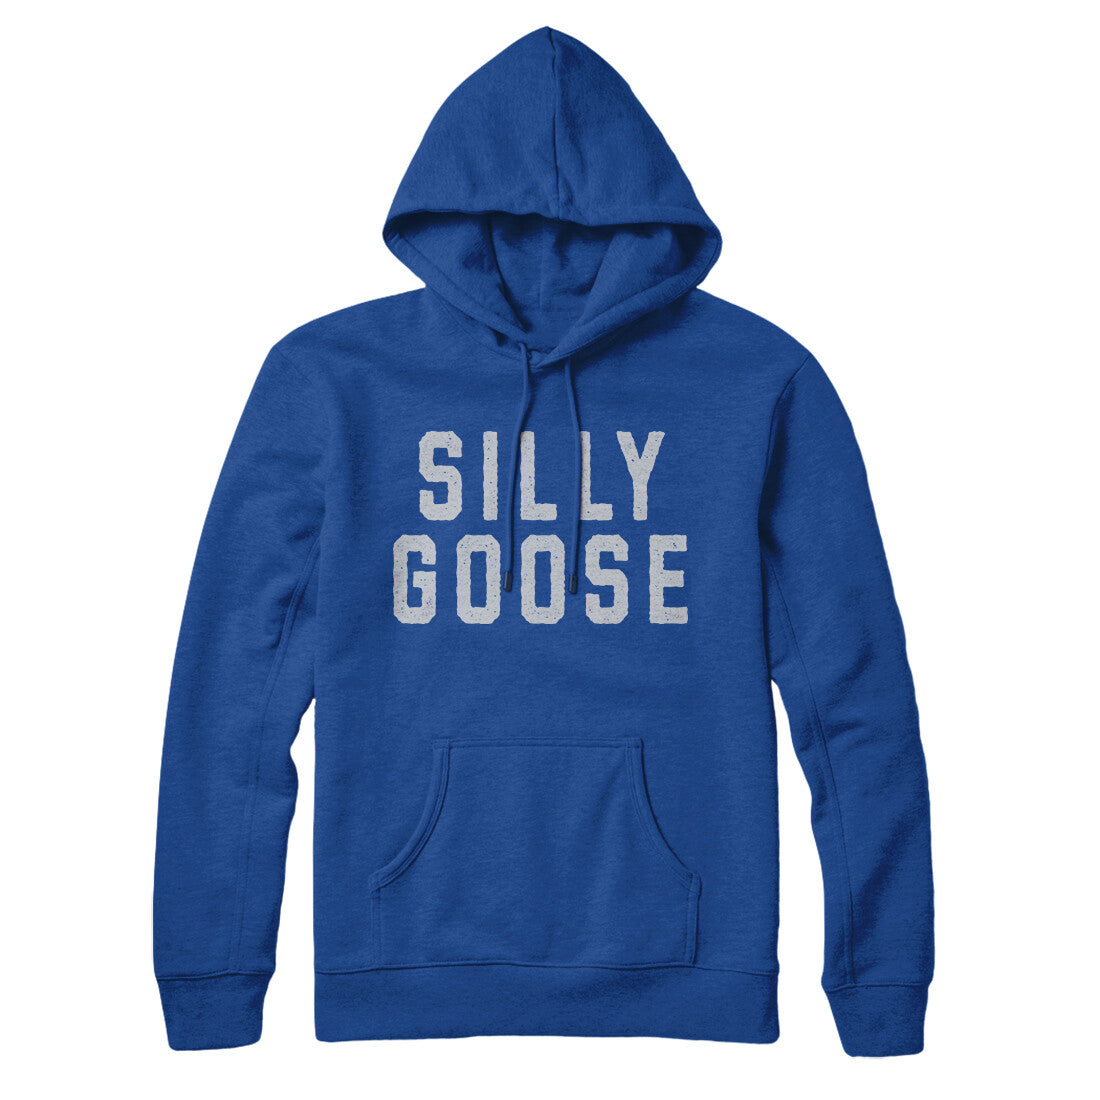 Silly Goose in True Royal Color